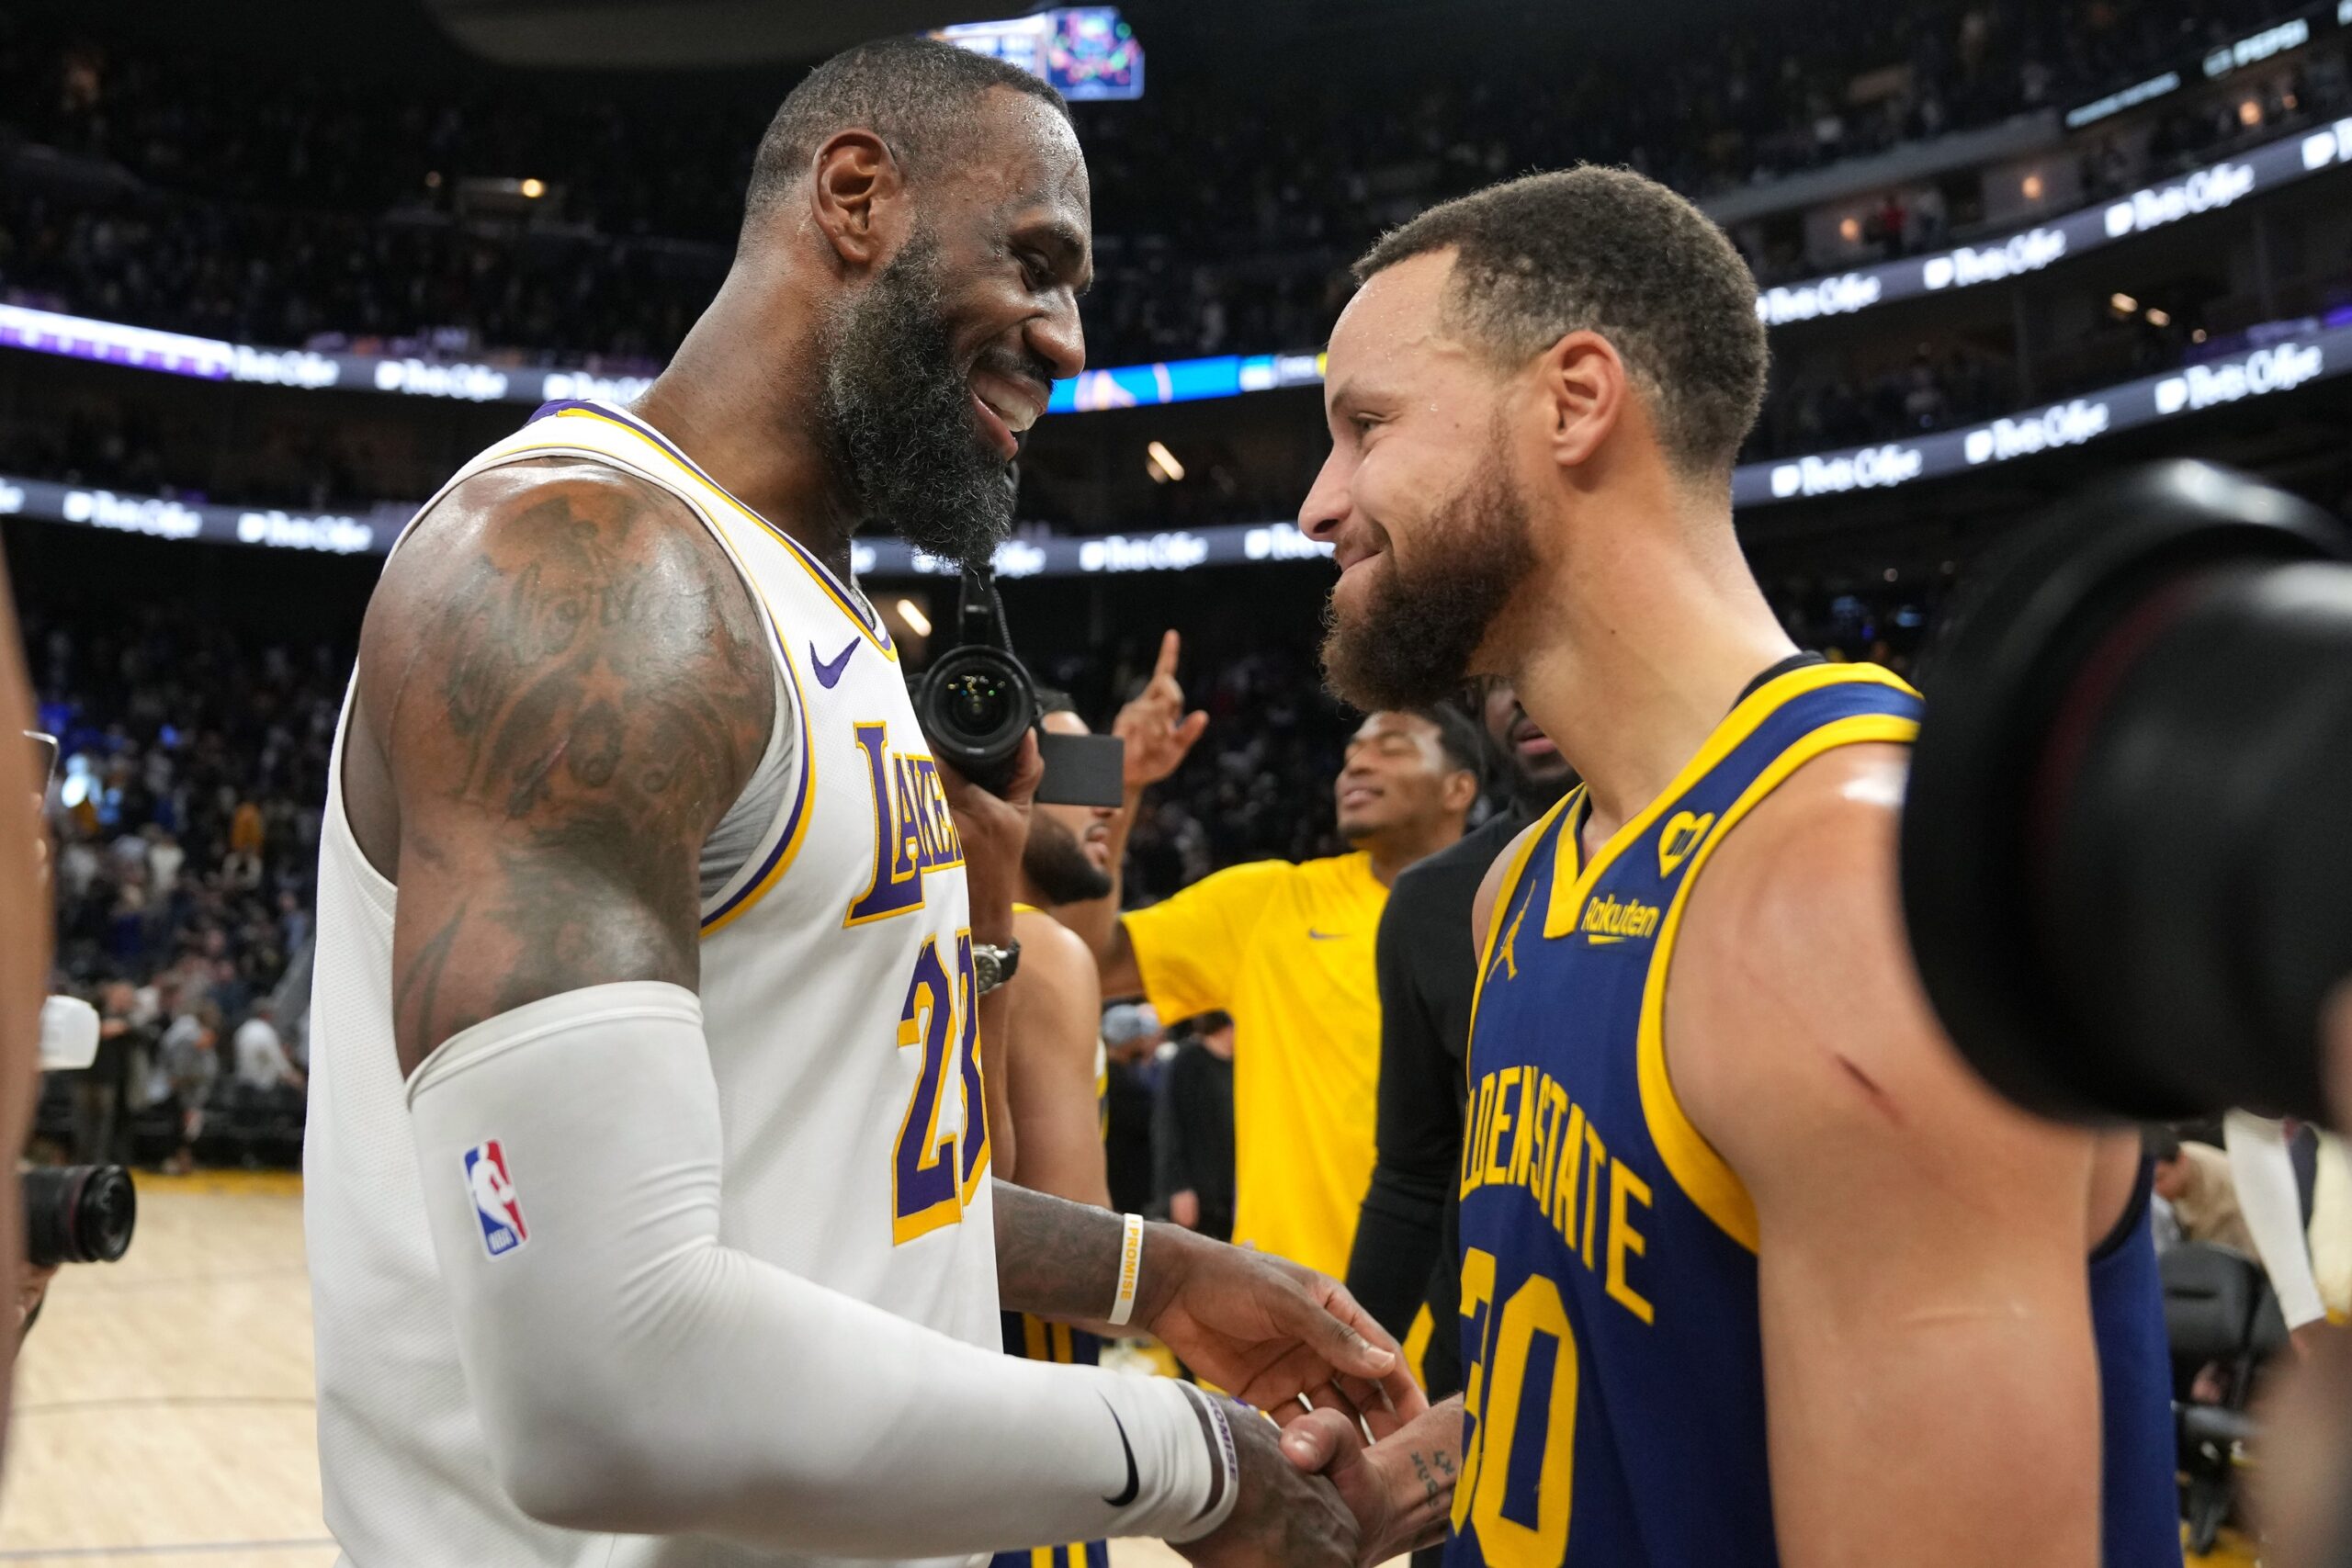 Steph Curry vs LeBron James makes for great TV